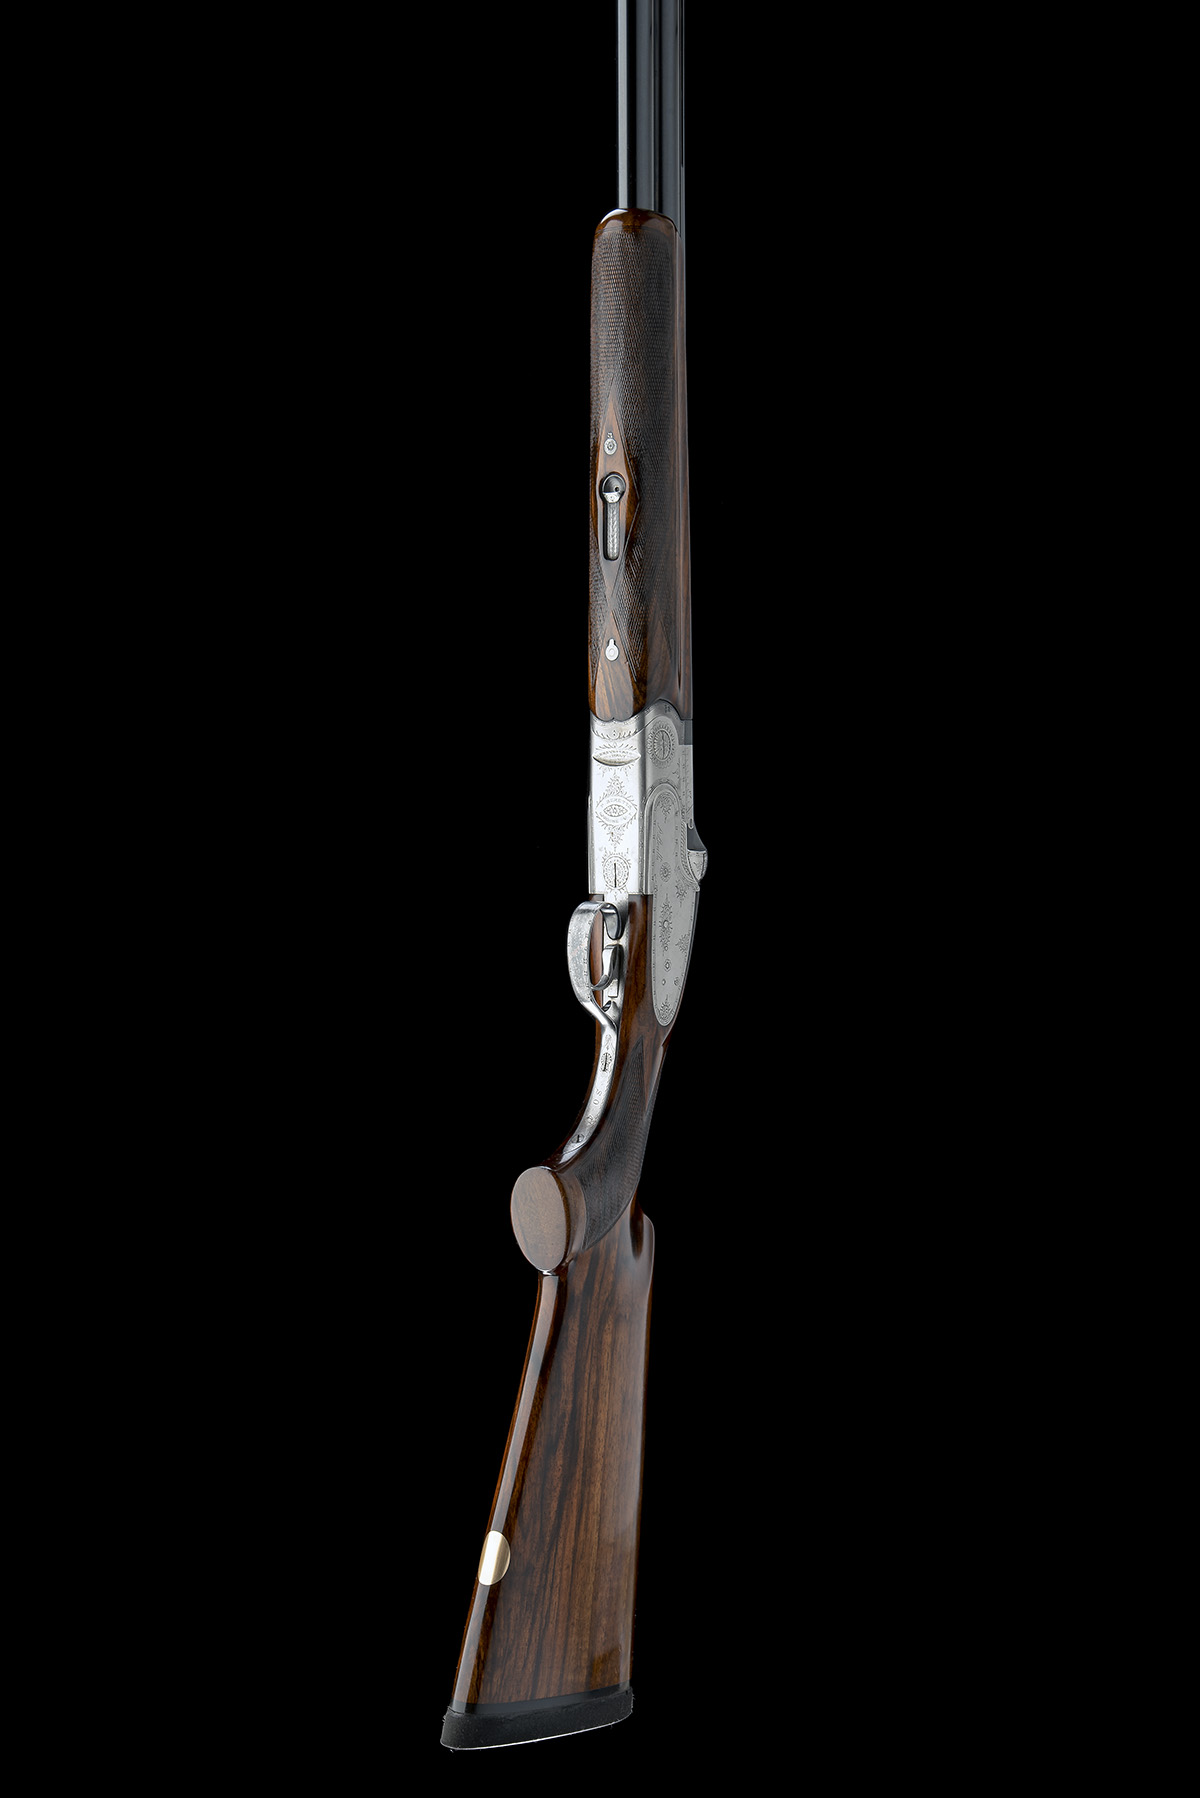 P. BERETTA A 12-BORE 'SO4' SINGLE-TRIGGER OVER AND UNDER SIDELOCK EJECTOR, serial no. C06832B, for - Image 8 of 8